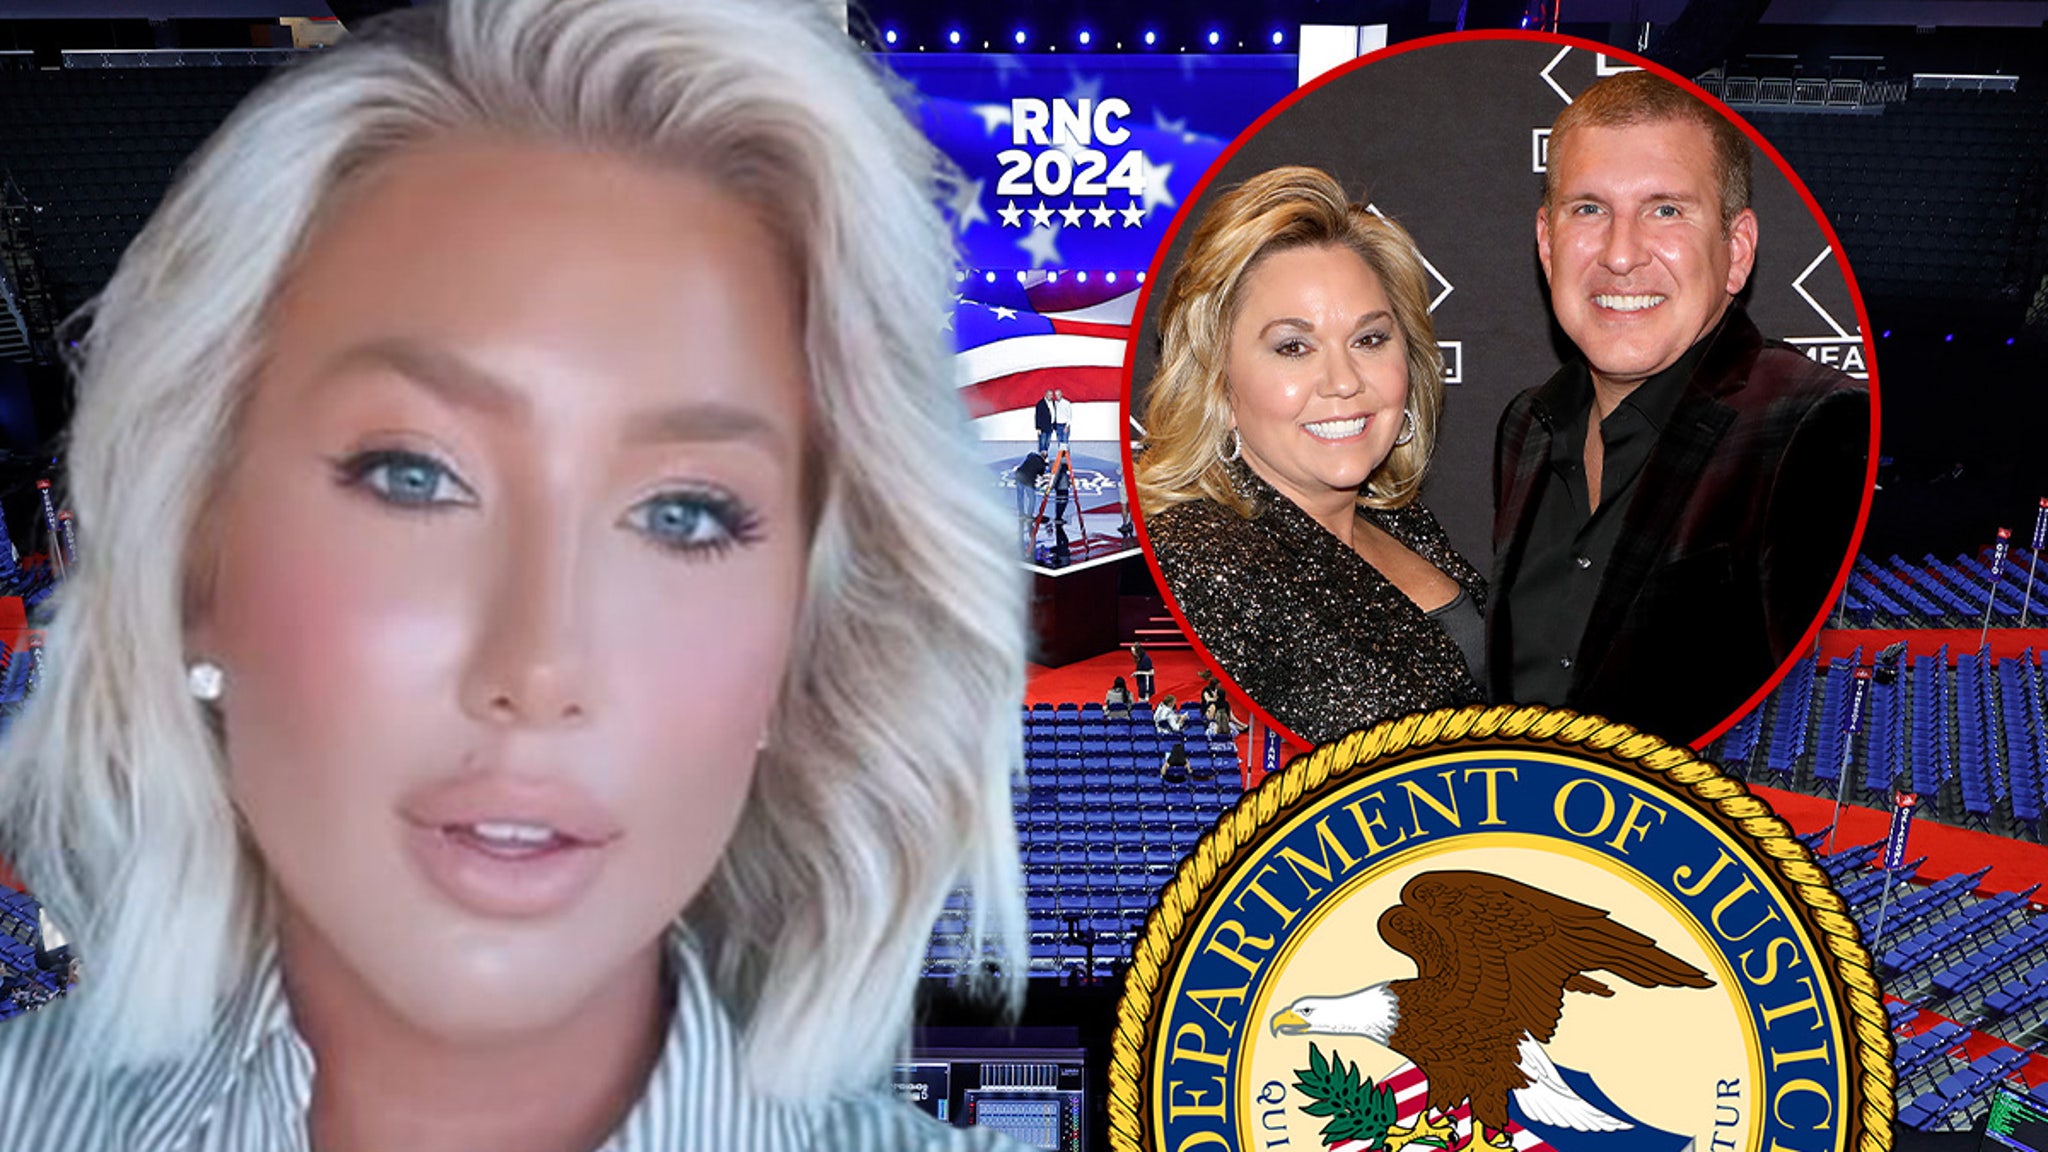 Savannah Chrisley wants to destroy justice at RNC after conviction of parents